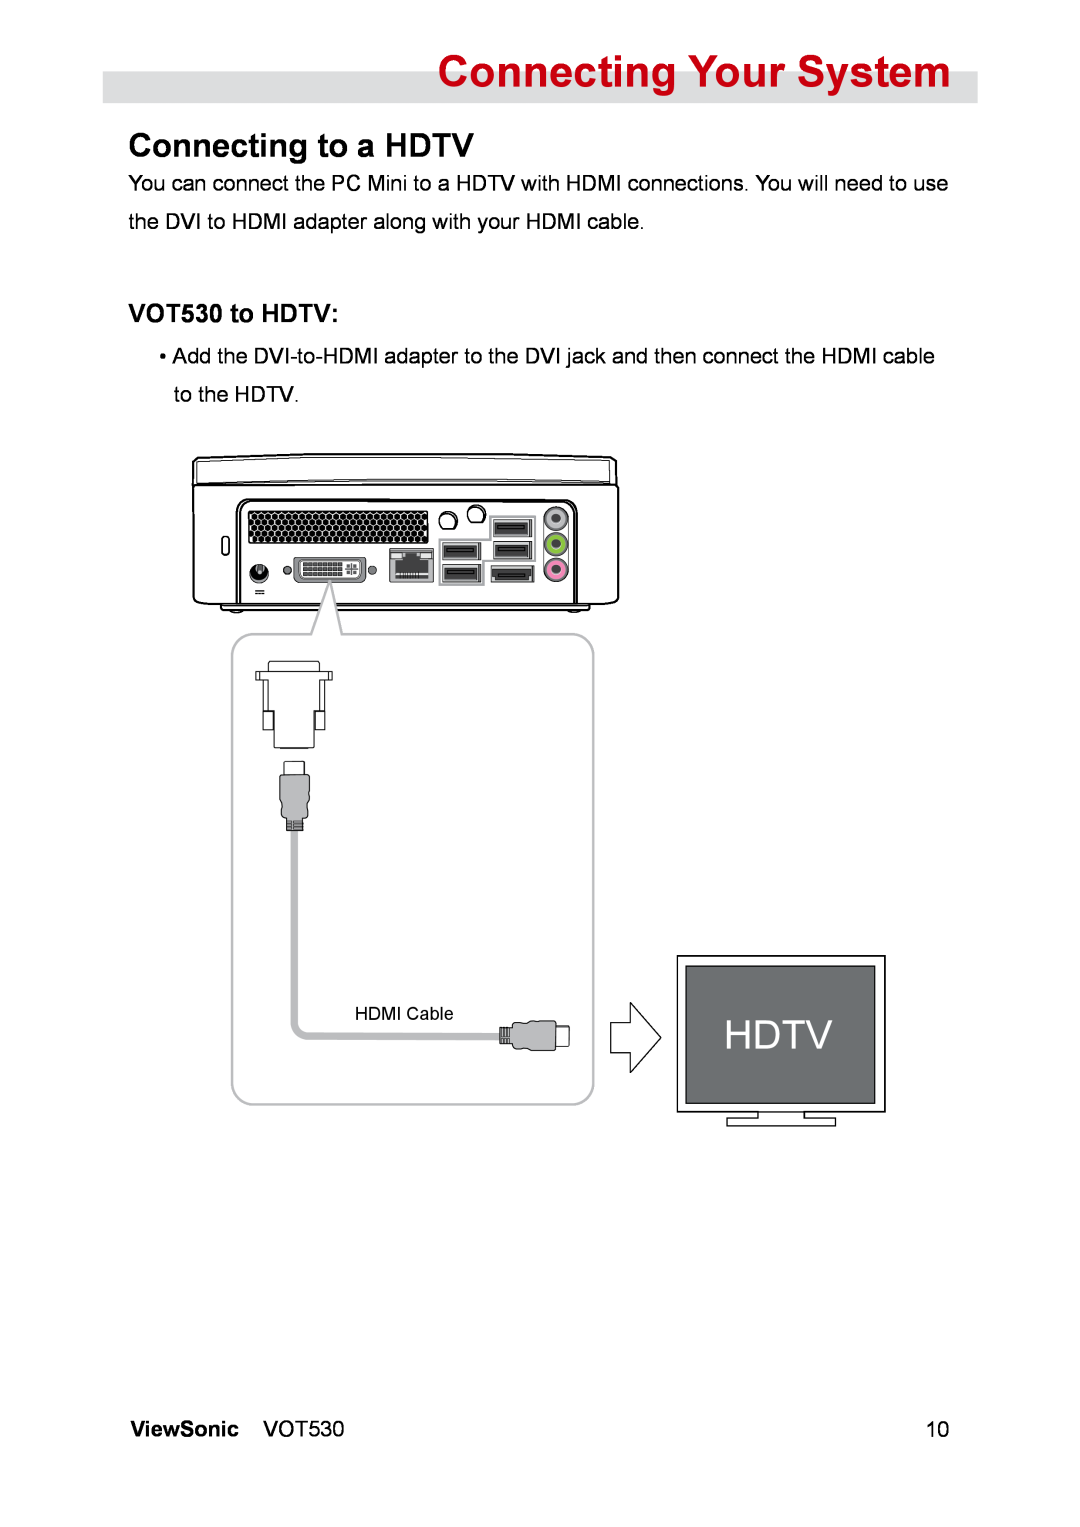 ViewSonic VS12661 manual Connecting to a HDTV, VOT530 to HDTV, Connecting Your System, Hdtv, ViewSonic VOT530 